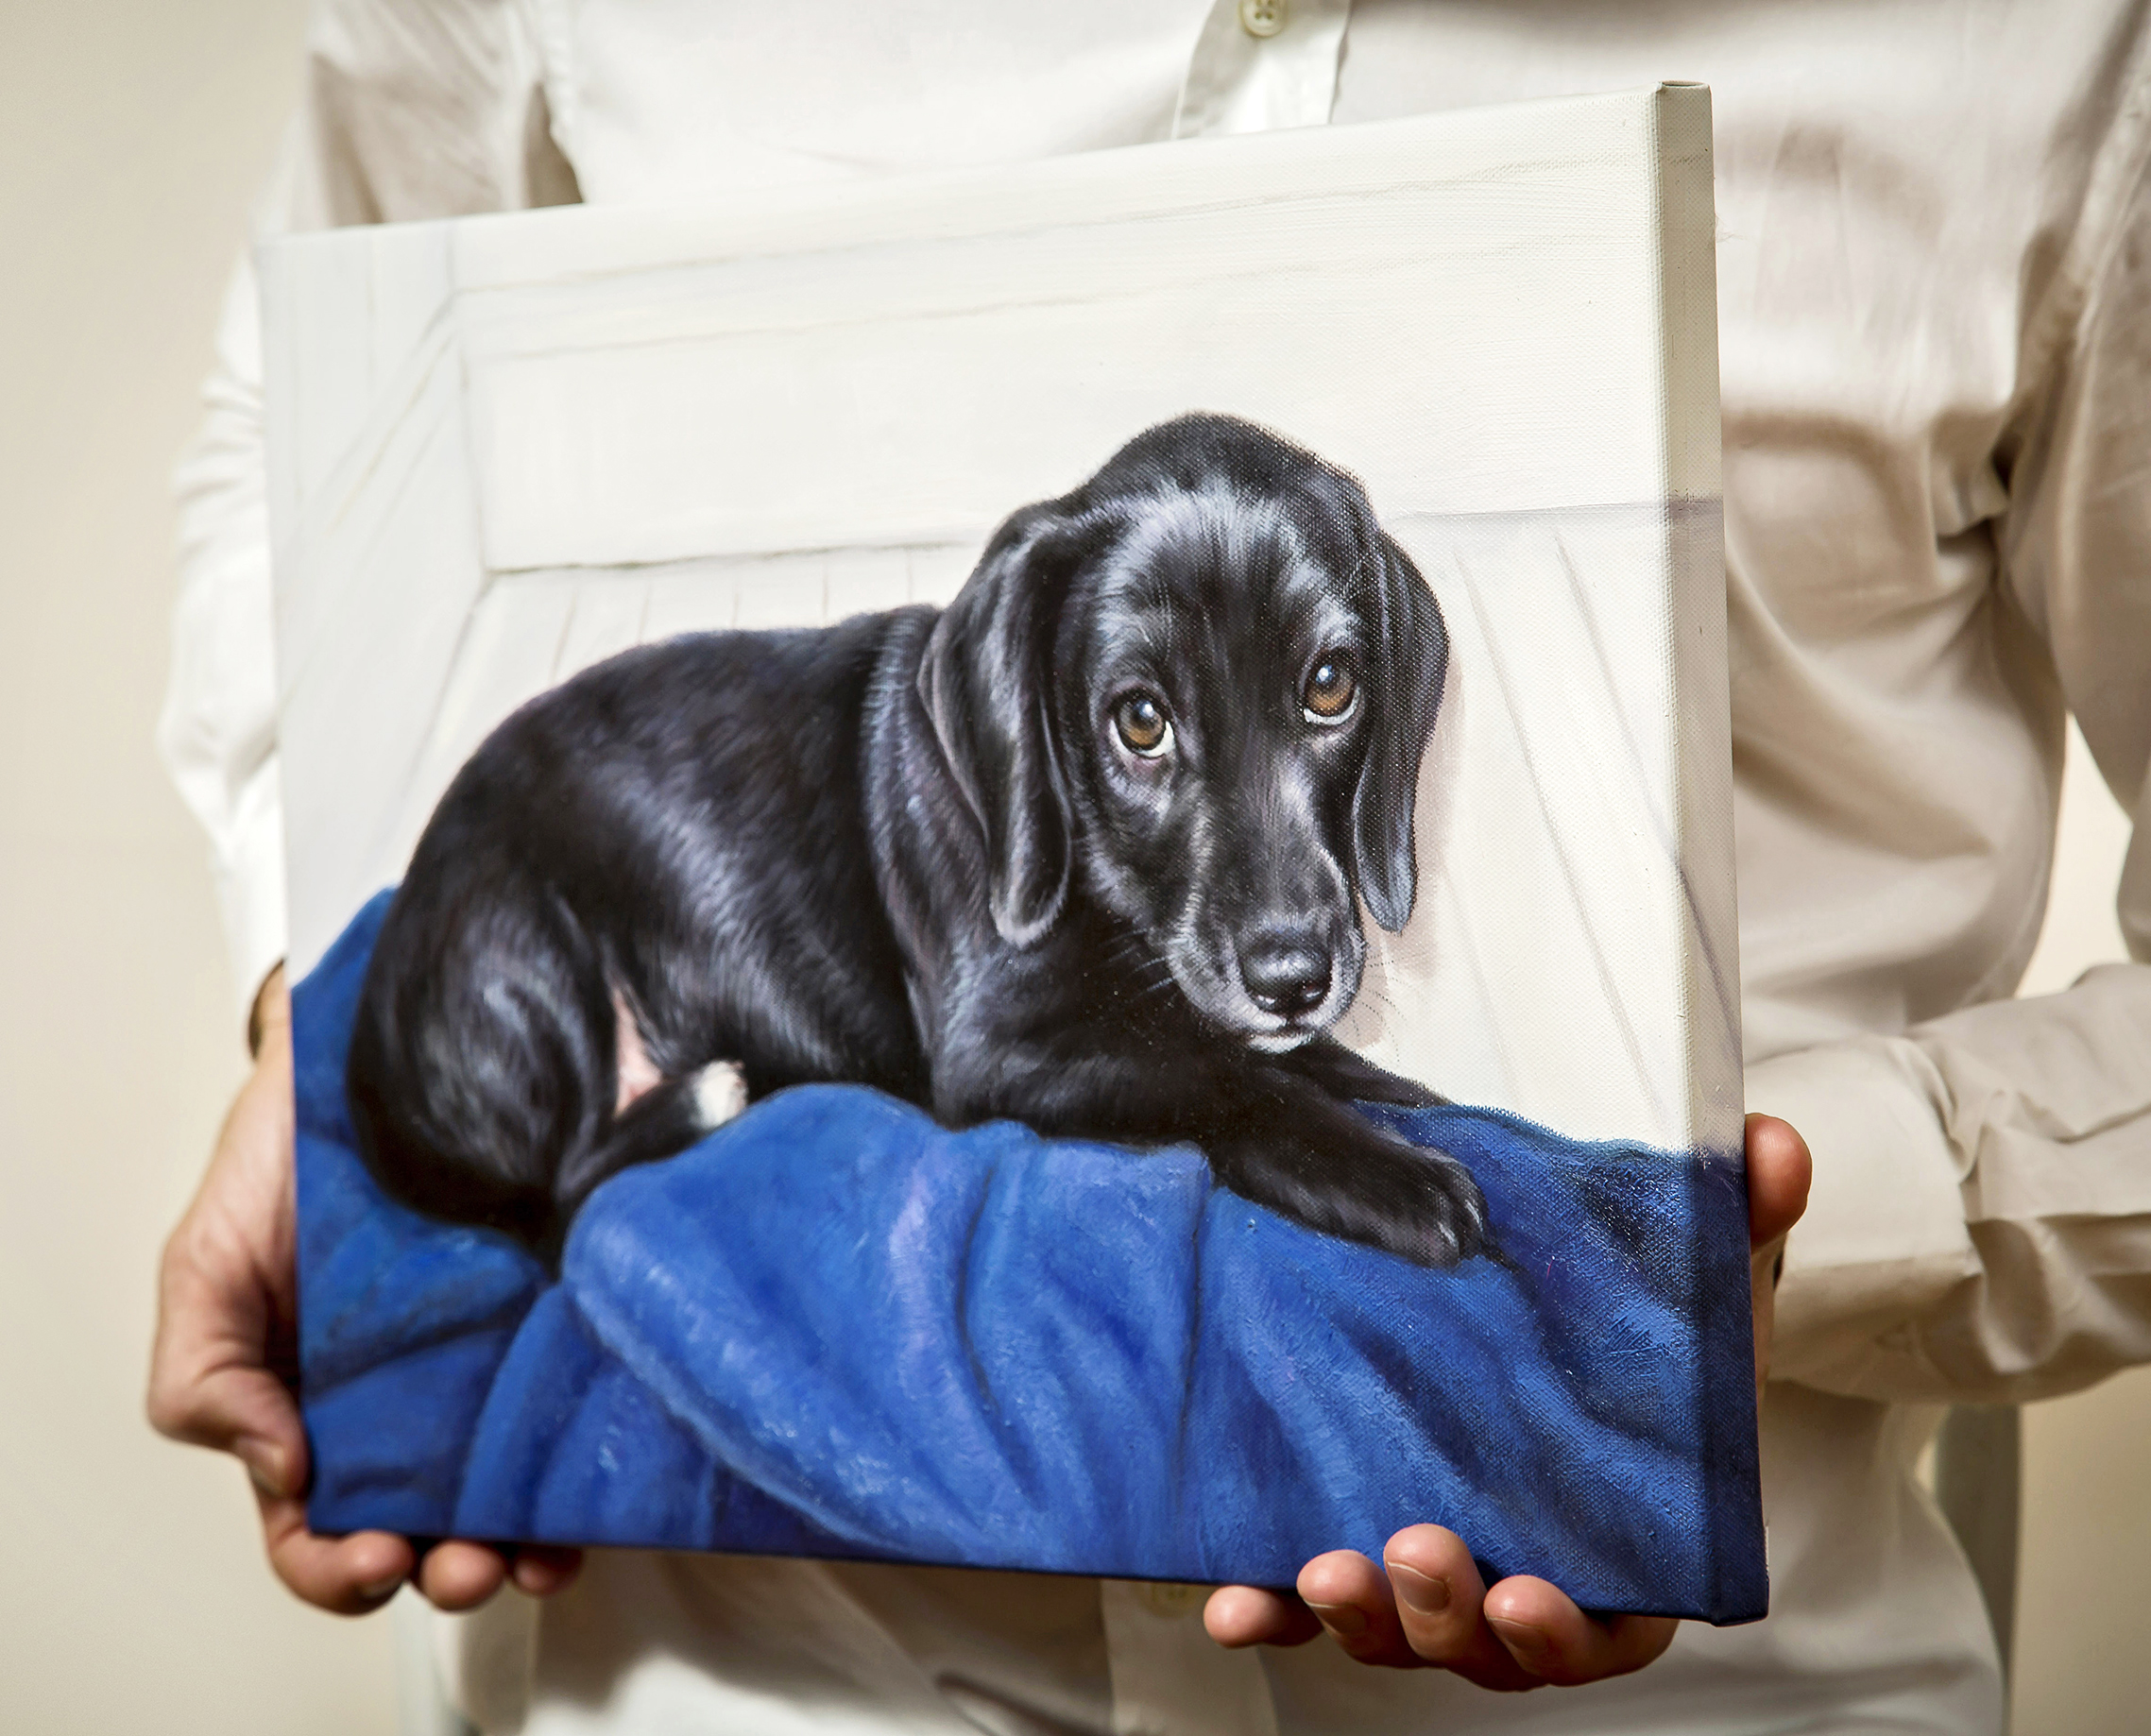 A pair of hands holding an oil painting of a black puppy